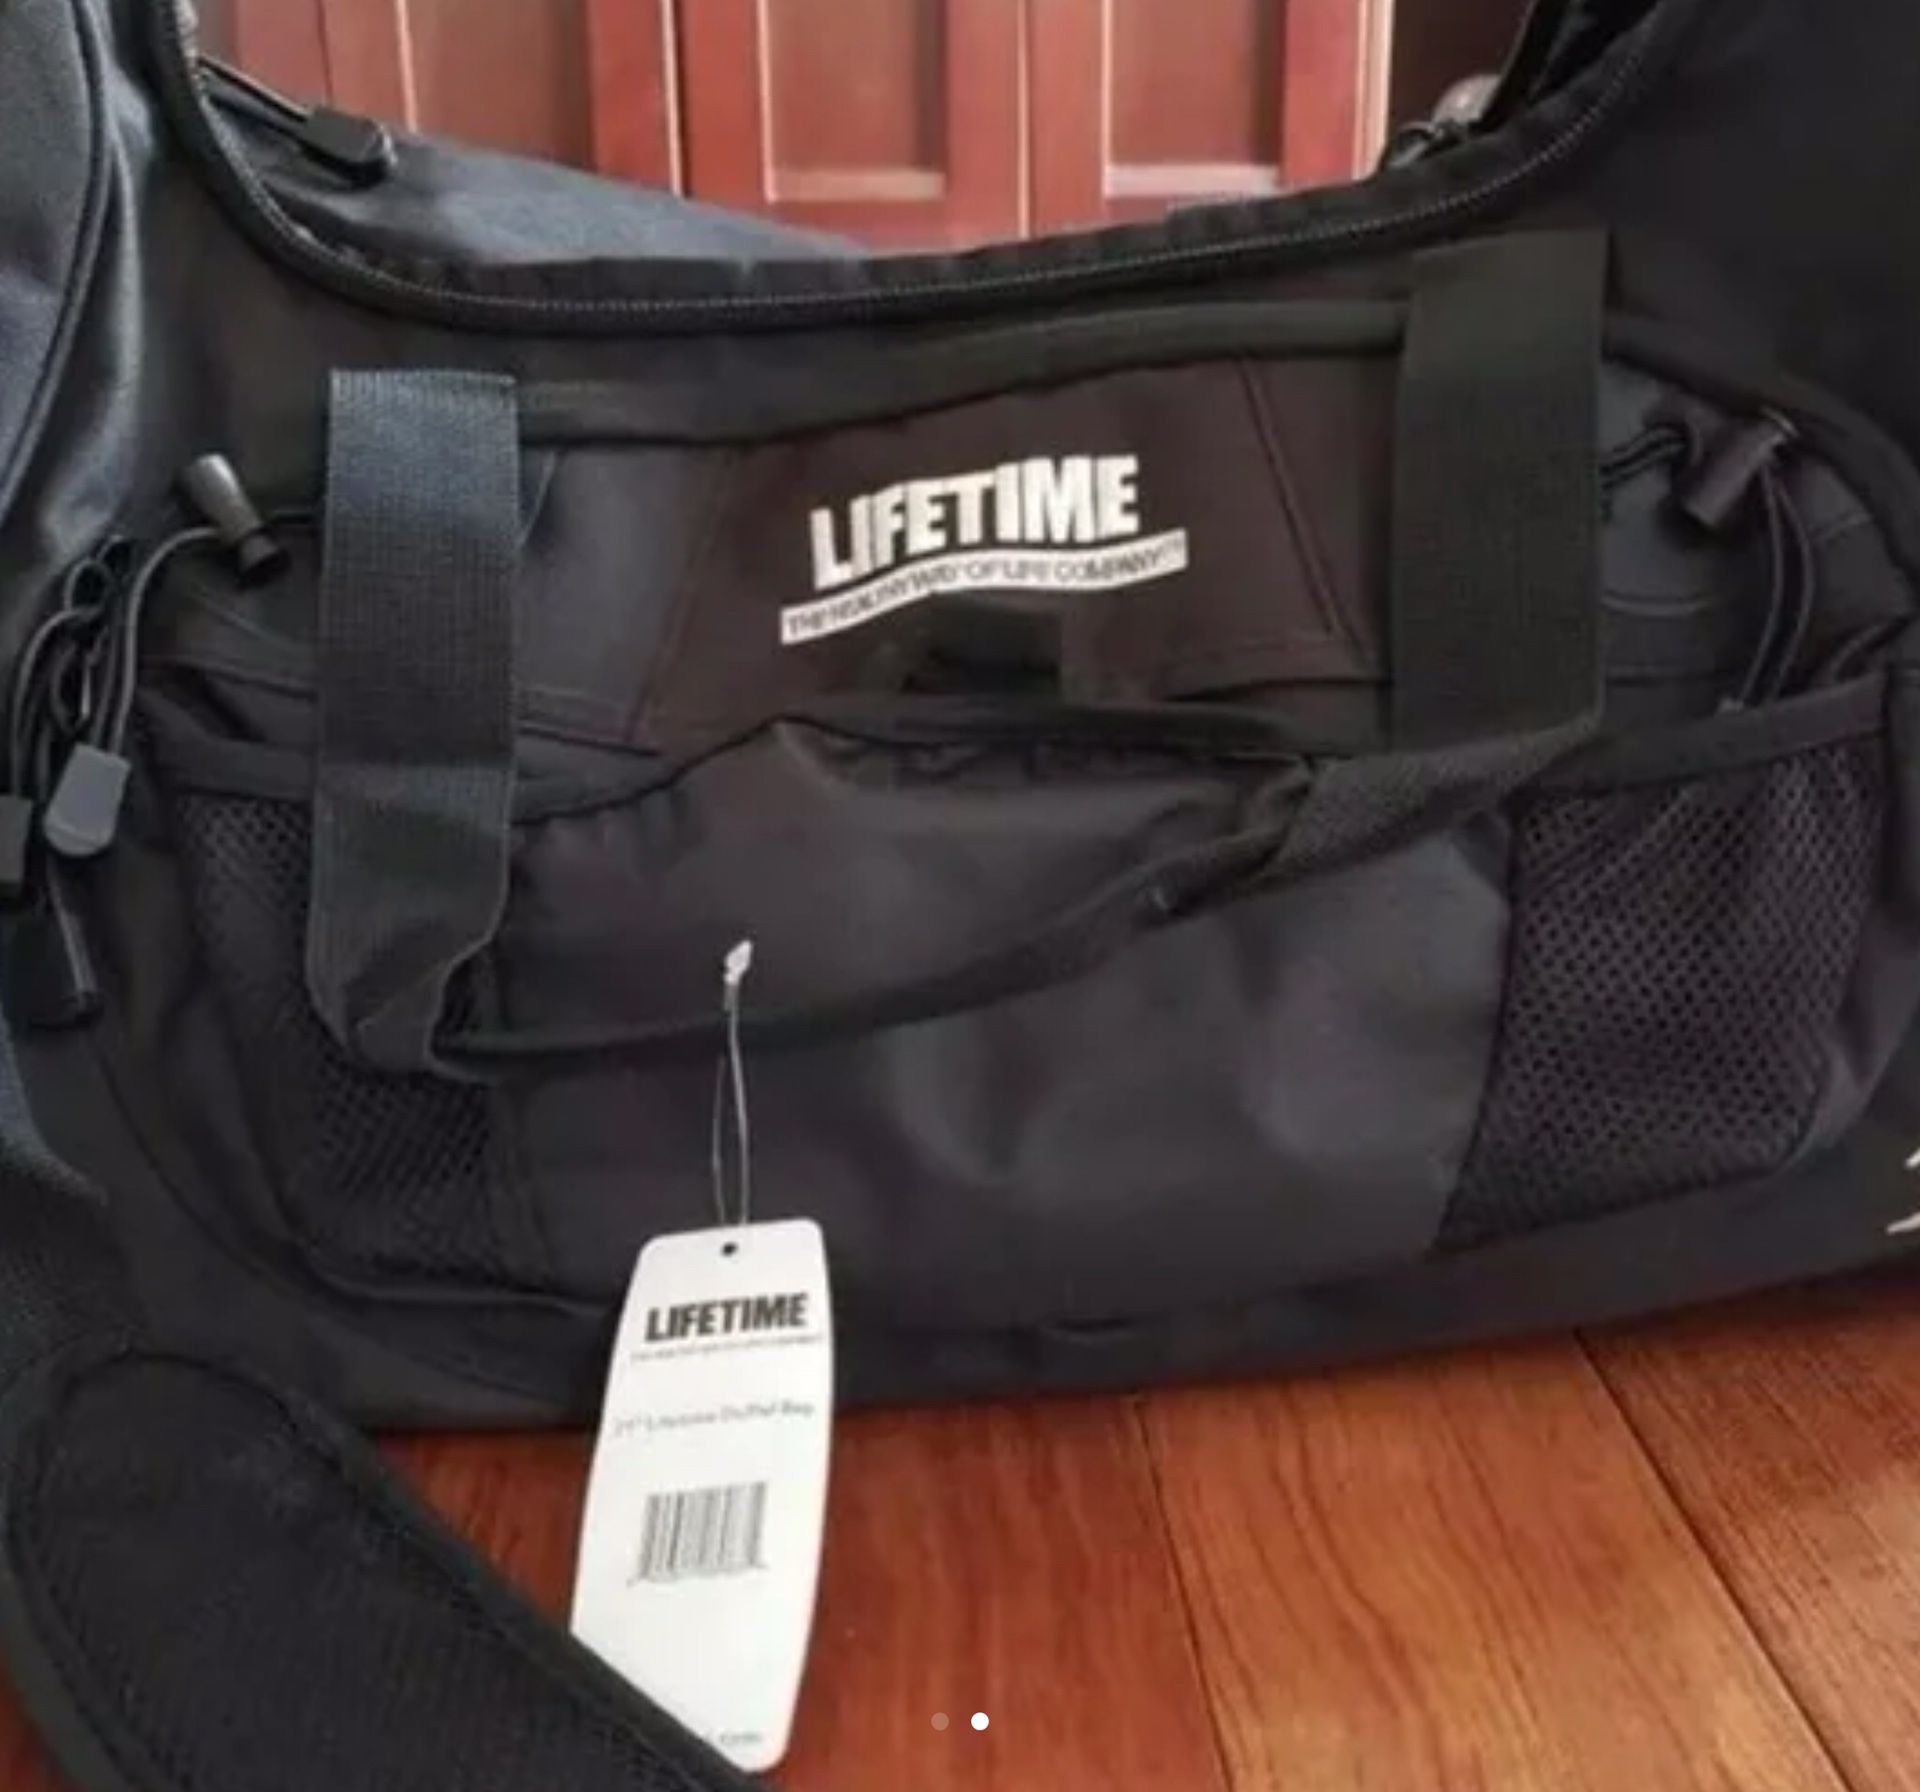 LIFETIME FITNESS BRAND GYM DUFFLE BAG - BRAND NEW Still in original MANUFACTURE PACKAGING WITH TAG